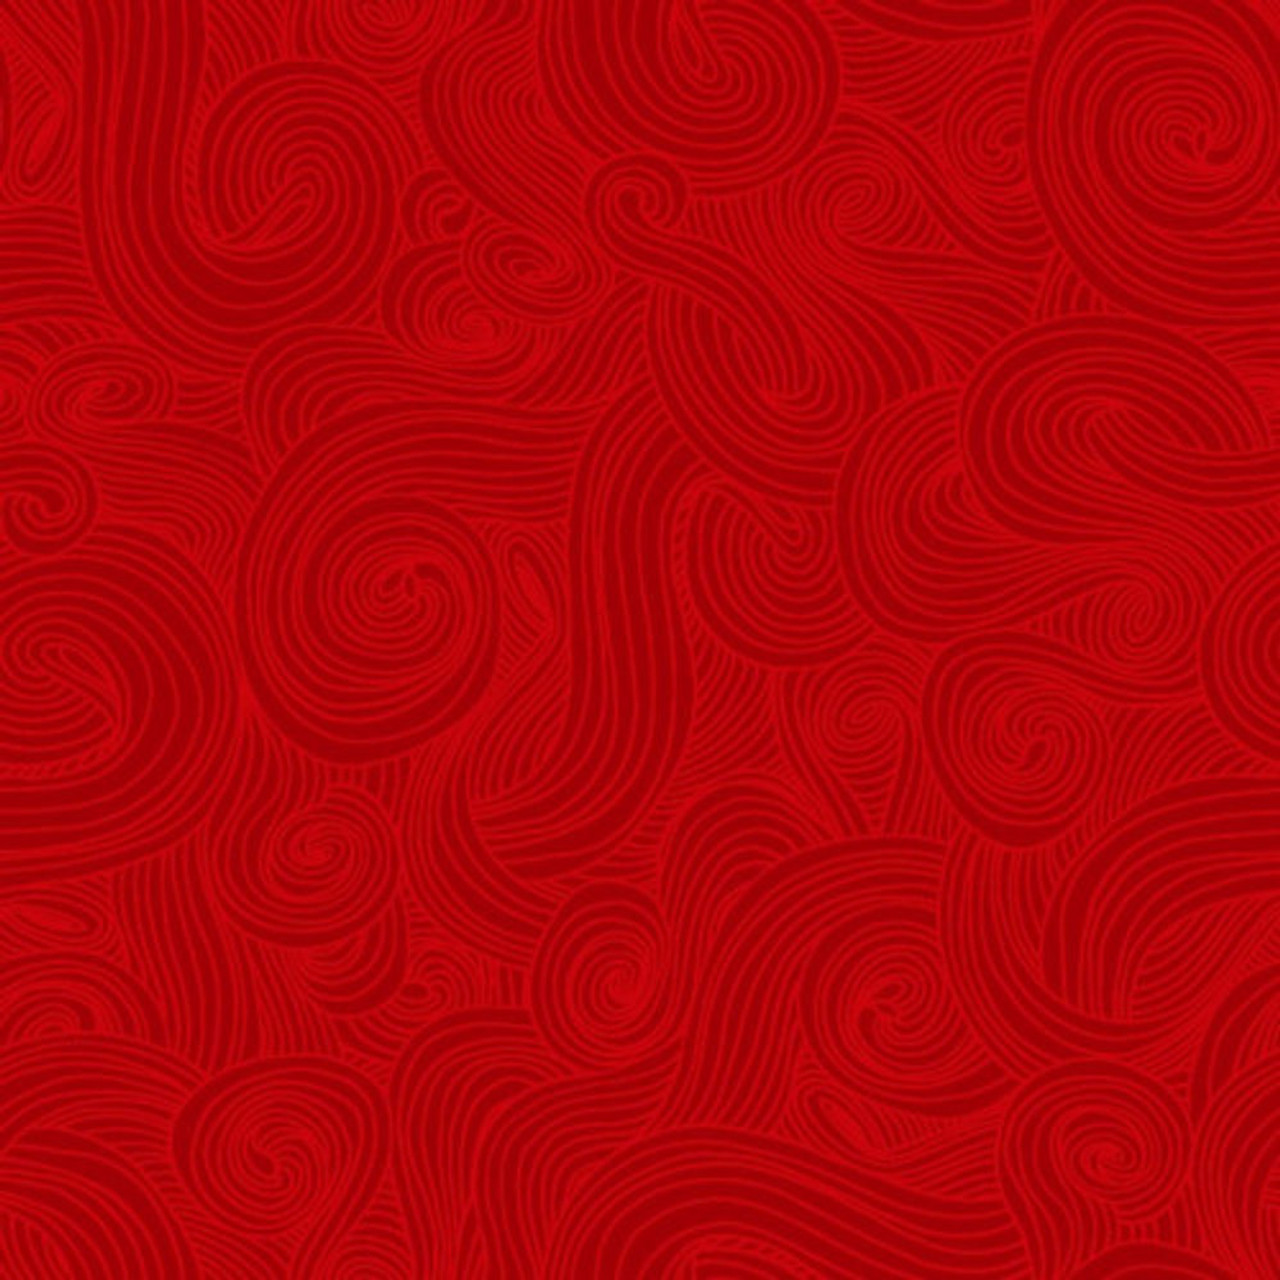 Studio E Just Color! Swirl Red Delicious Cotton Fabric By The Yard